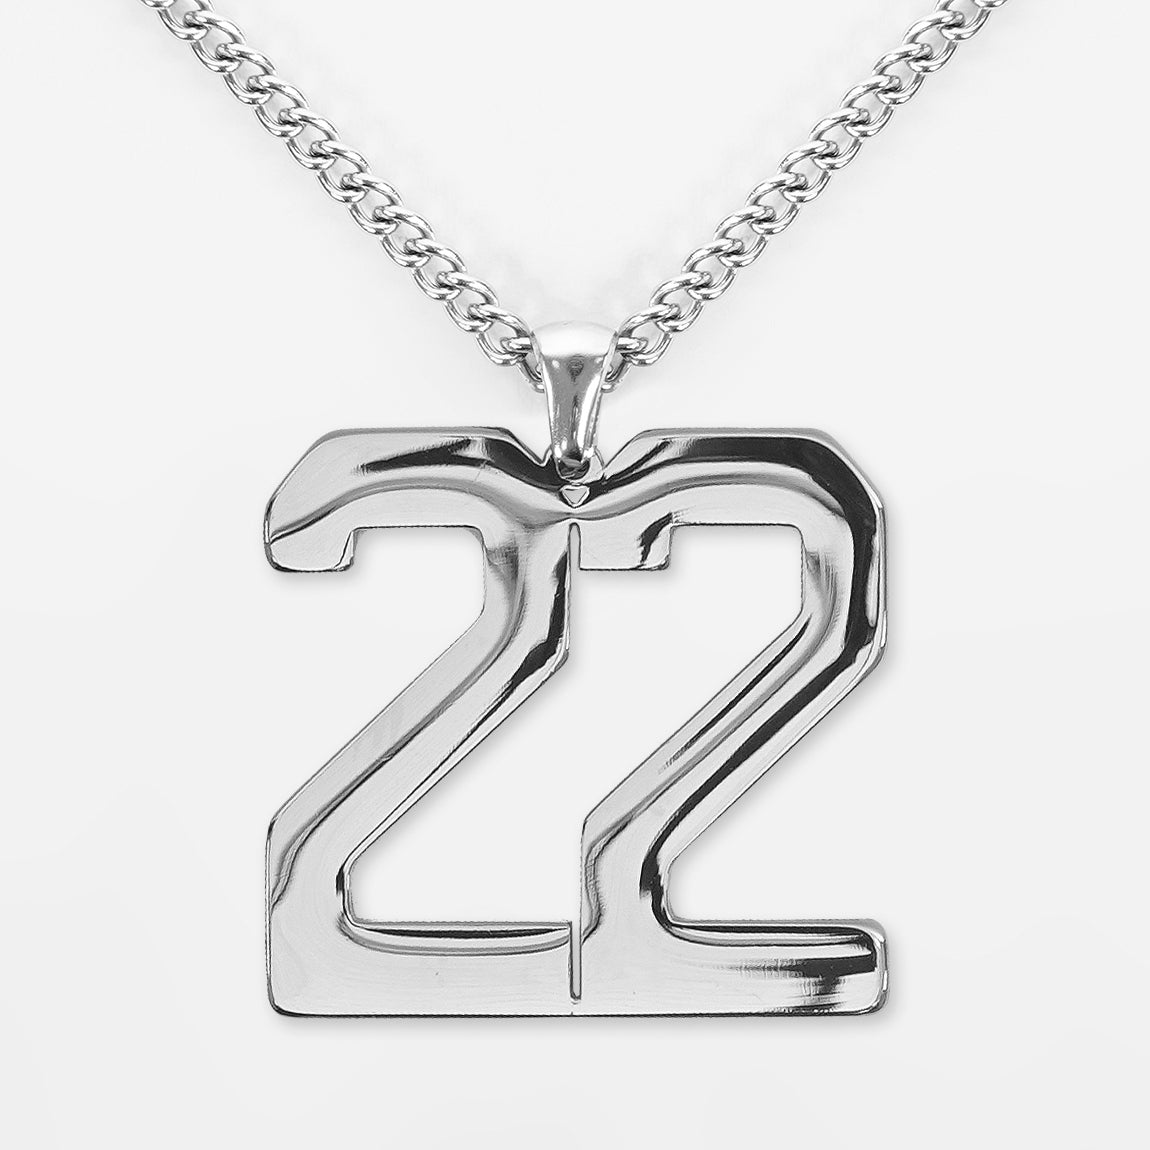 22 Number Pendant with Chain Necklace - Stainless Steel